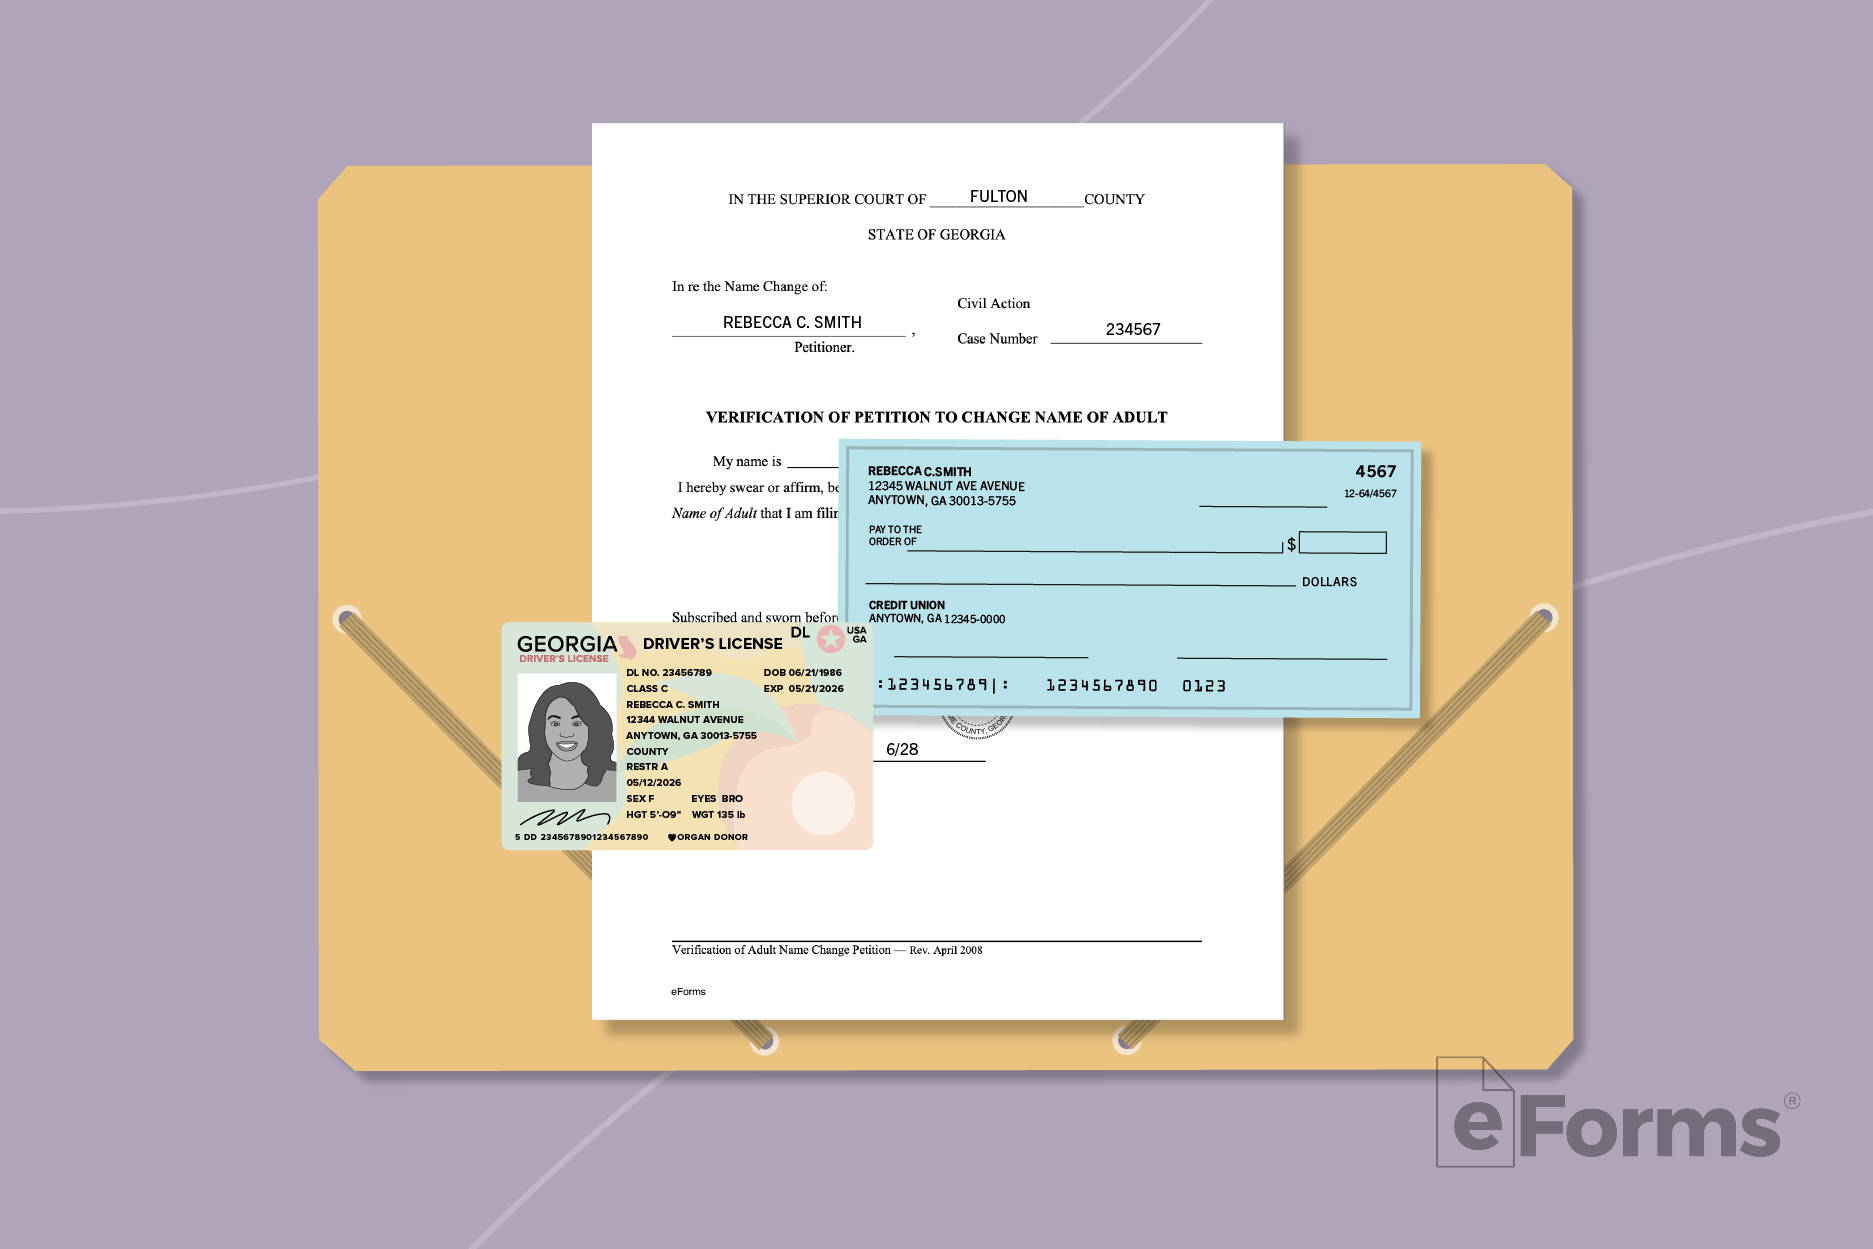 File folder with paperwork, check and driver's license.